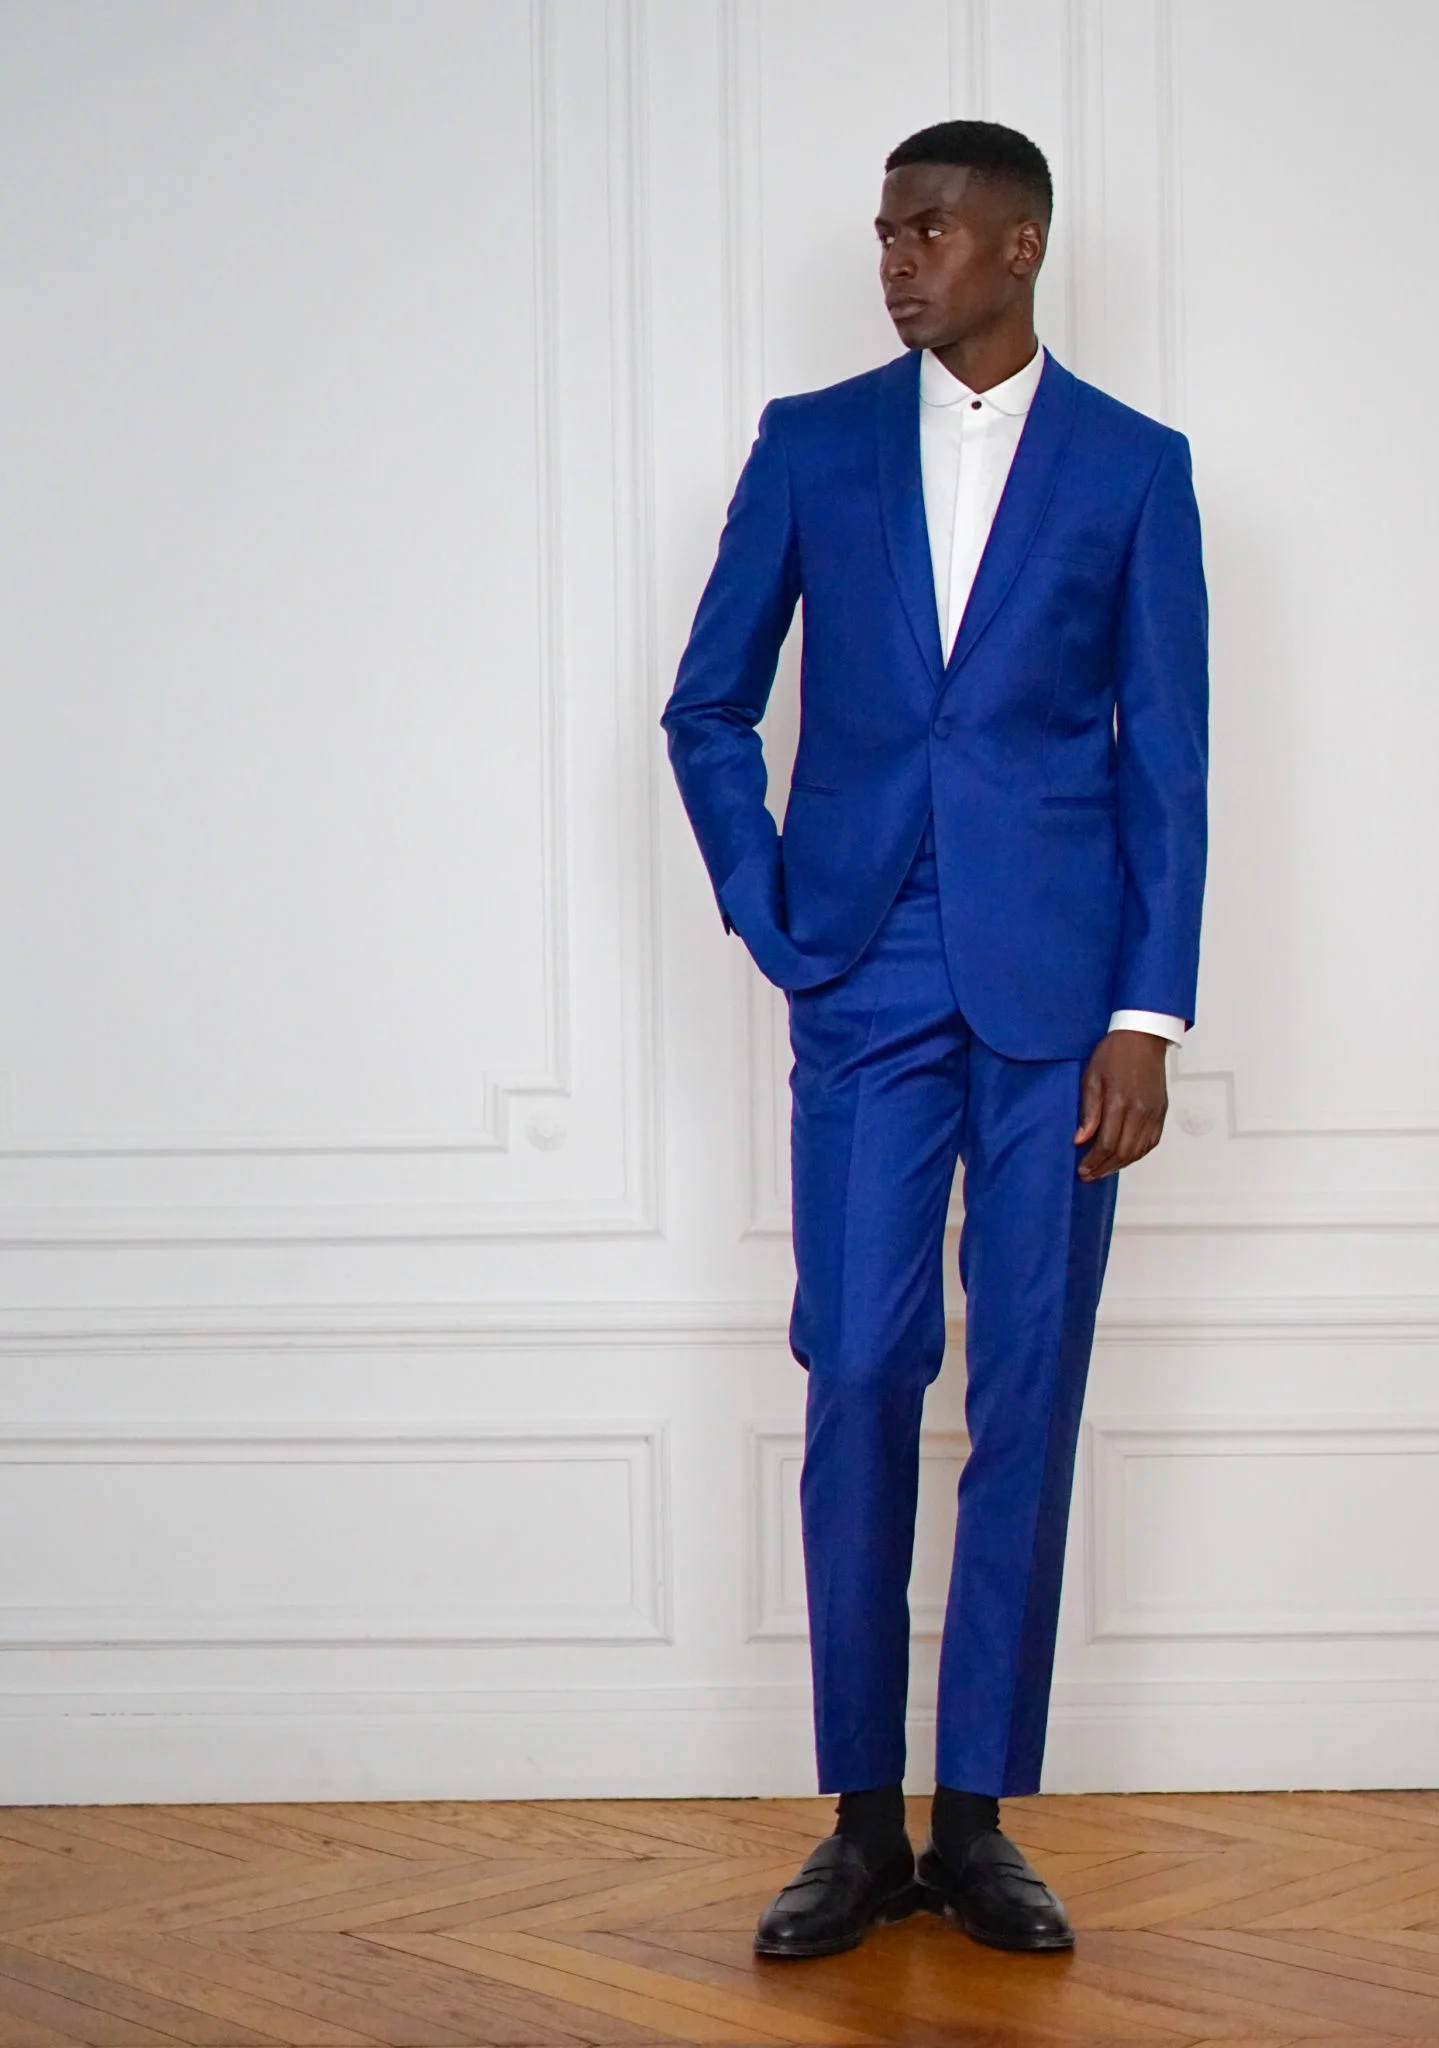 THE ULTIMATE GUIDE TO TAILOR-MADE SUITS: TIPS AND TRICKS FOR A FLAWLESS LOOK